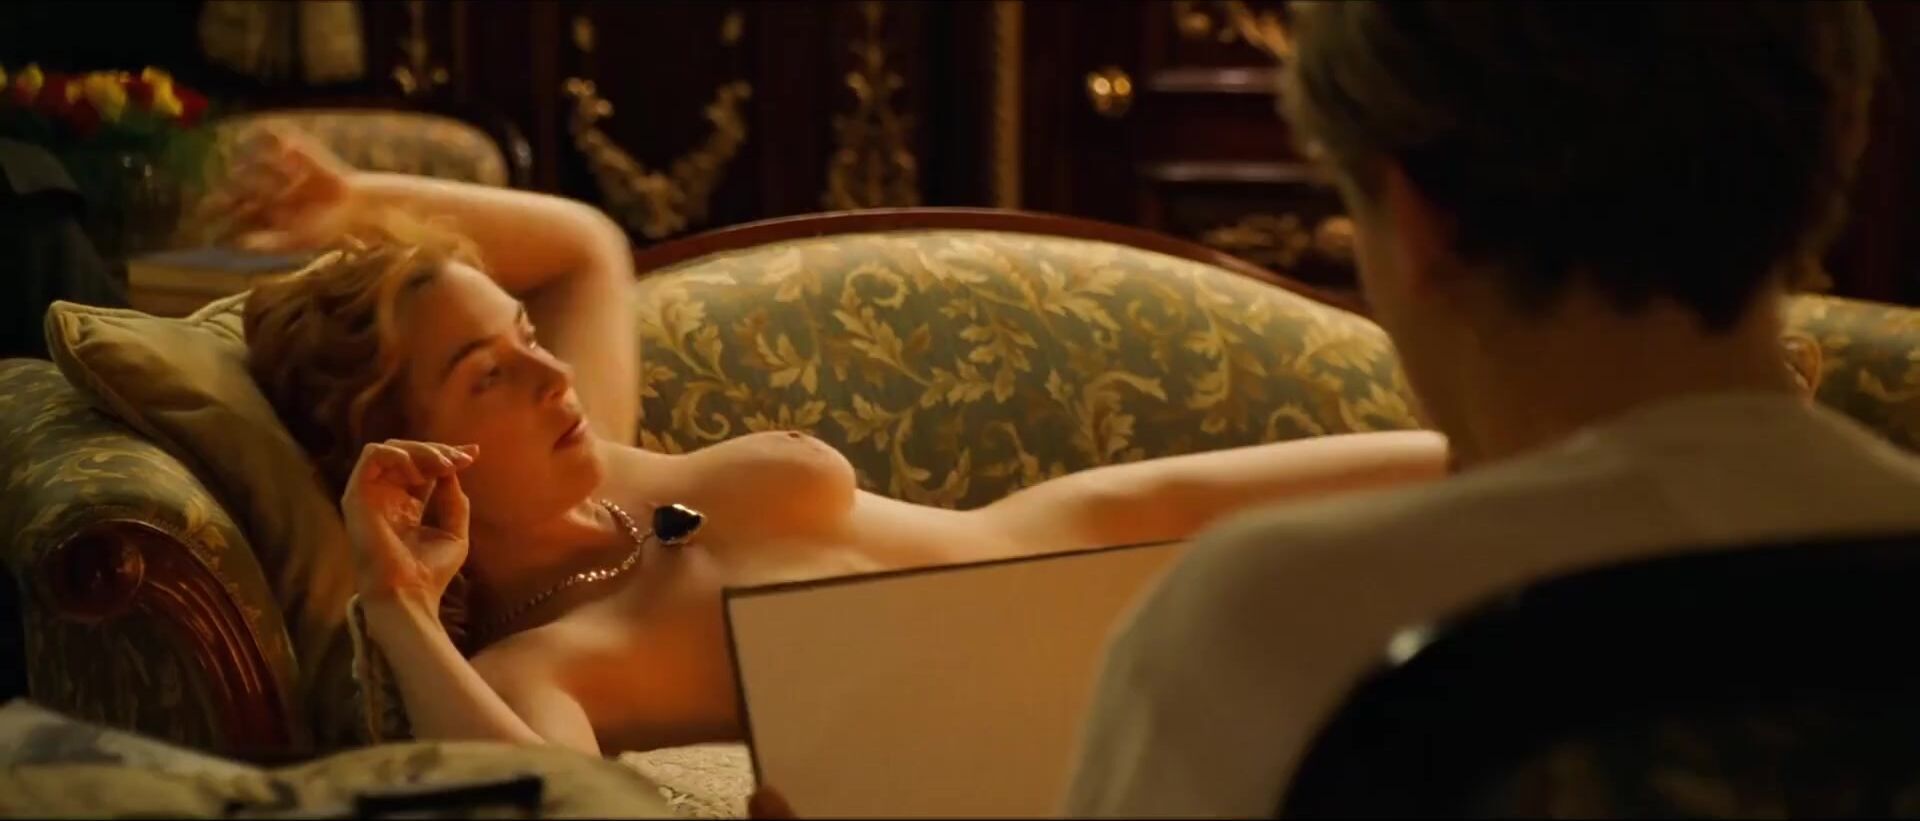 Heavy-R Leonardo DiCaprio loves chick's body and draws her before fucking in Titanic (1997) Huge Ass - 2